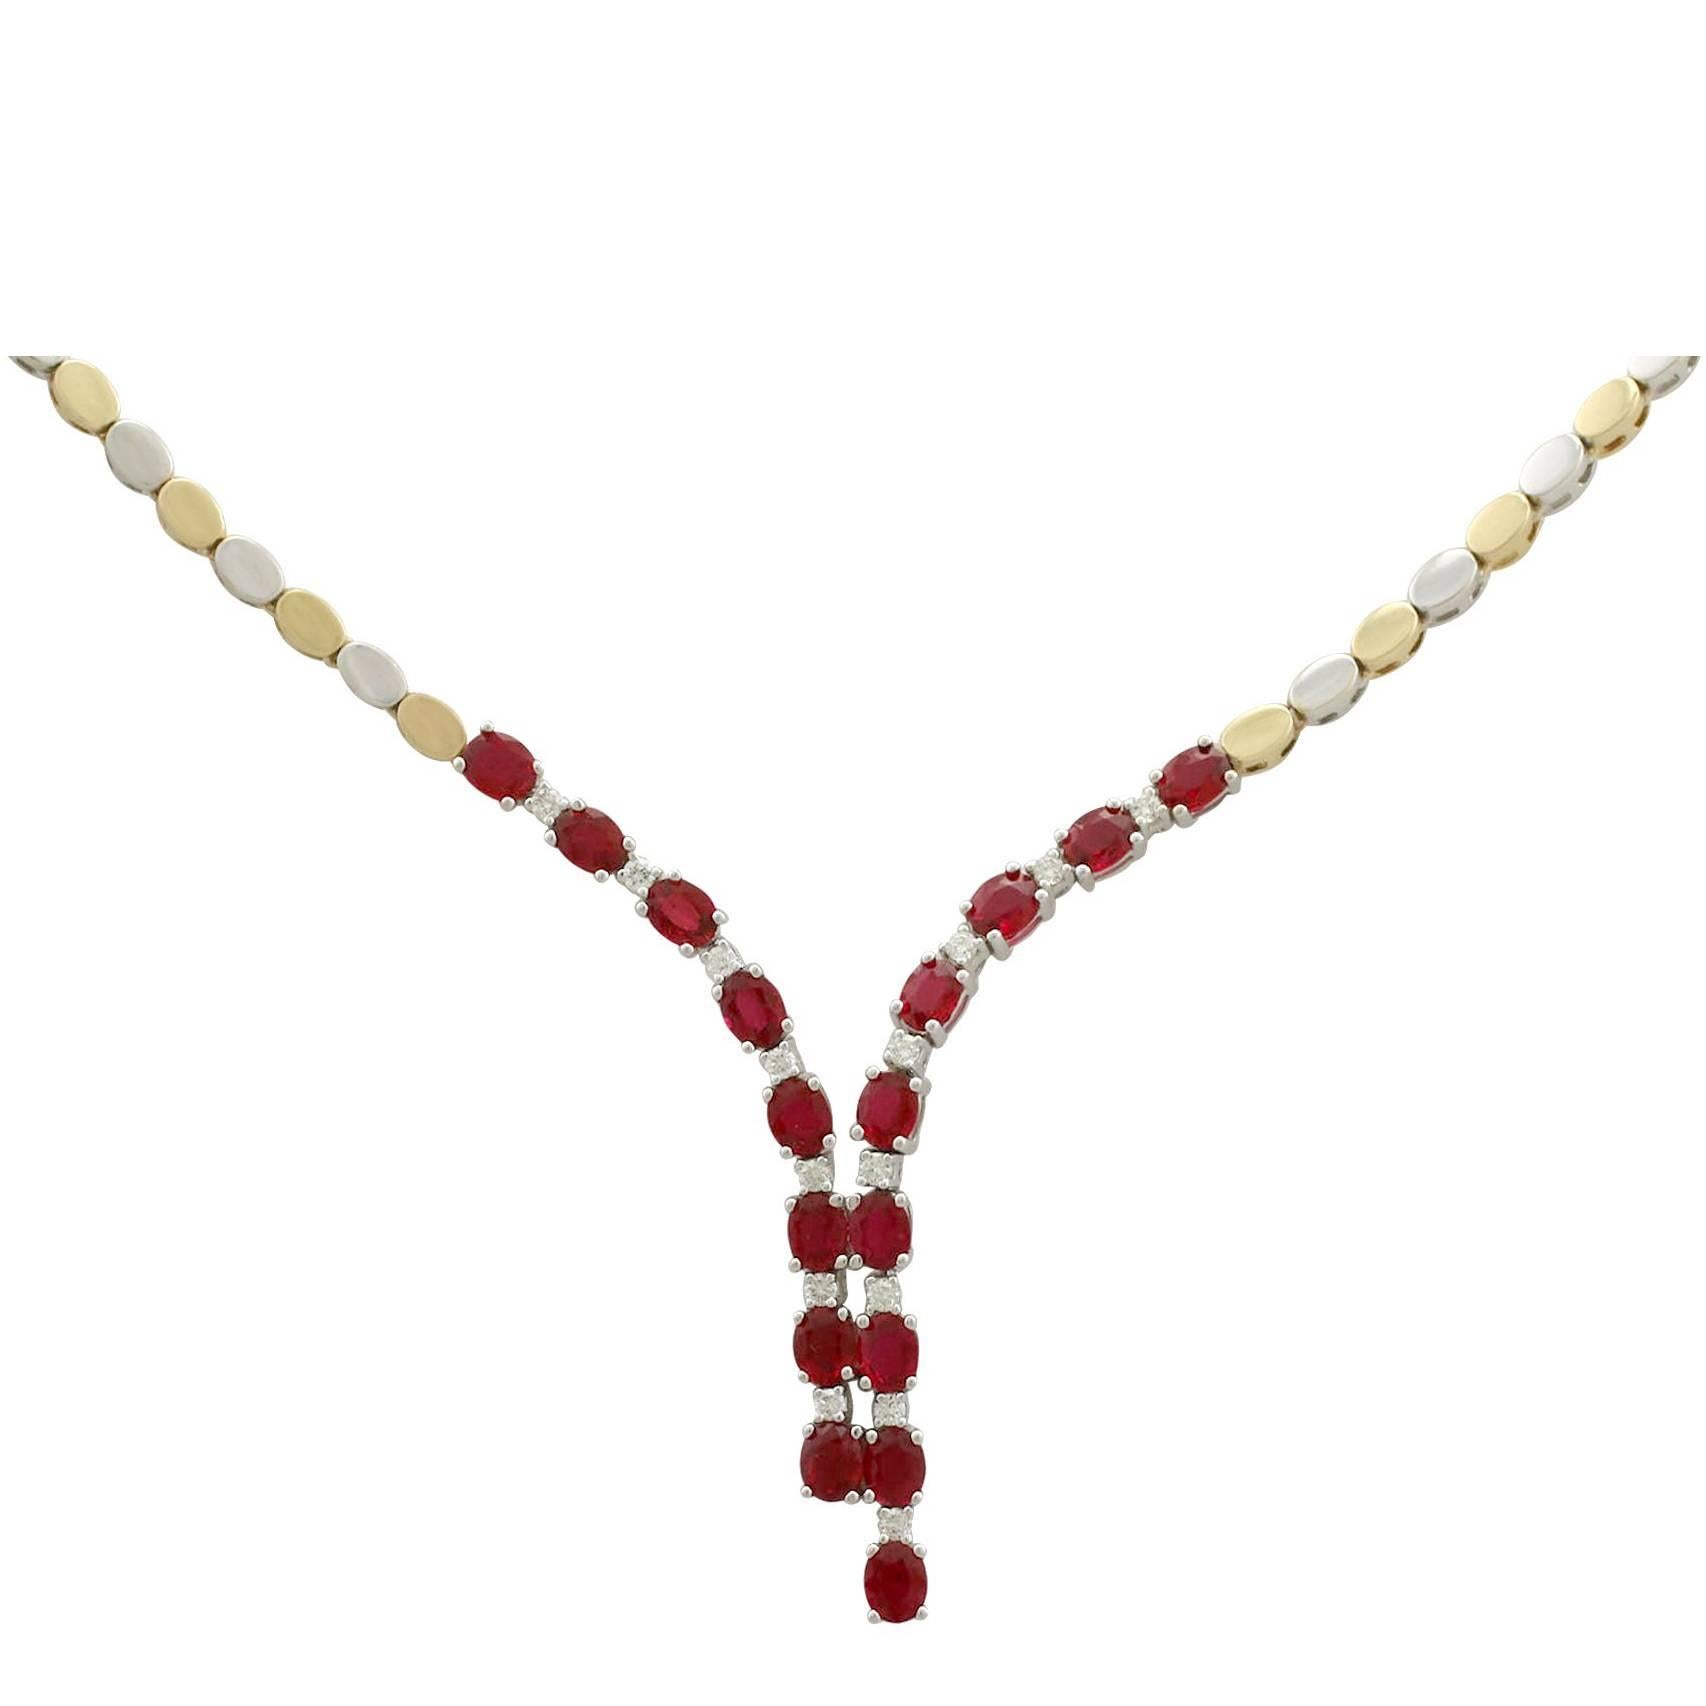 An impressive vintage 12.48 carat ruby and 0.52 carat diamond, 18 karat yellow and white gold jewelry suite; part of our diverse antique jewelry and estate jewelry collections

This fine and impressive ruby jewelry suite has been crafted in 18k